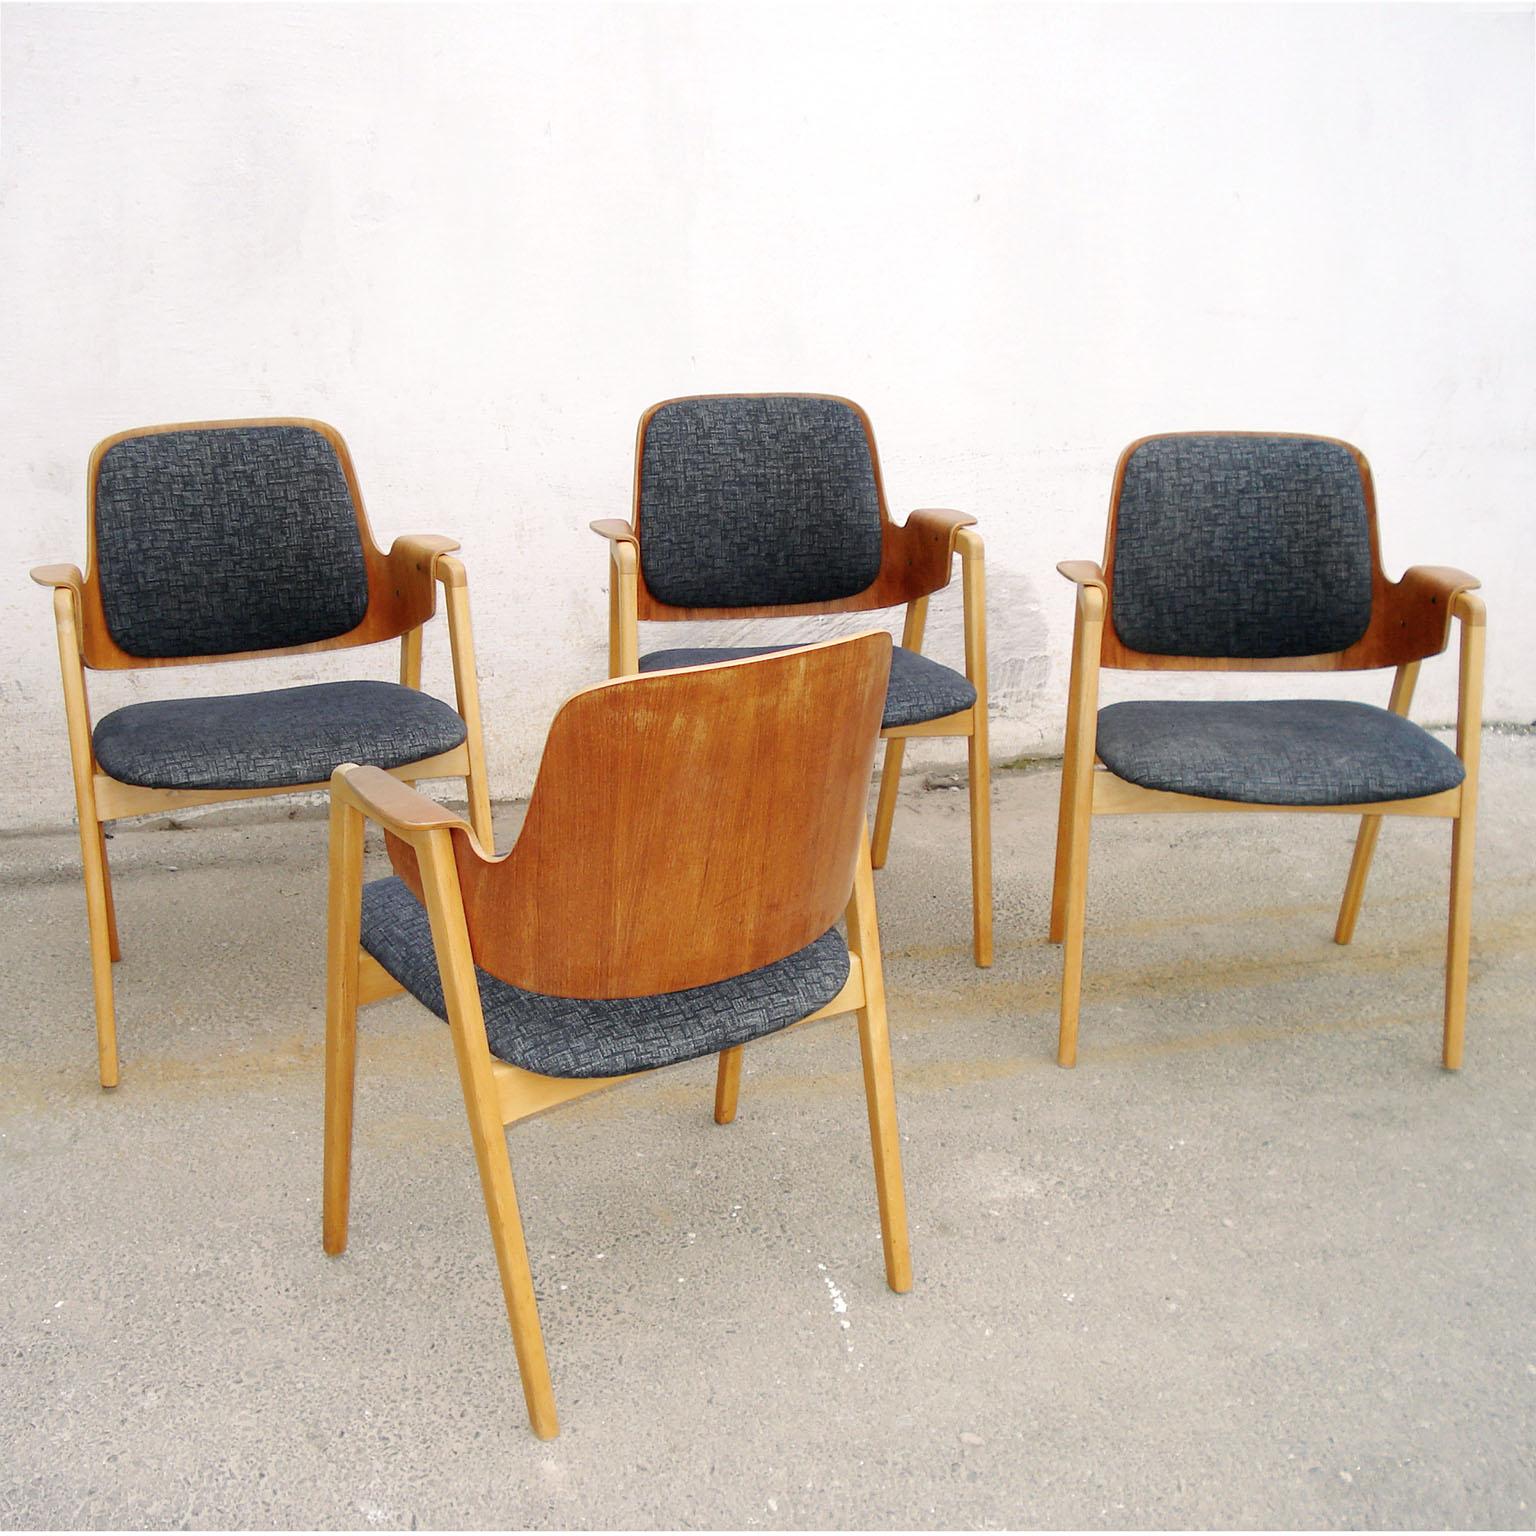 Swedish Set of 4 Elias Barup Teak Dining Chairs with Original Upholstery, 1950s Sweden For Sale